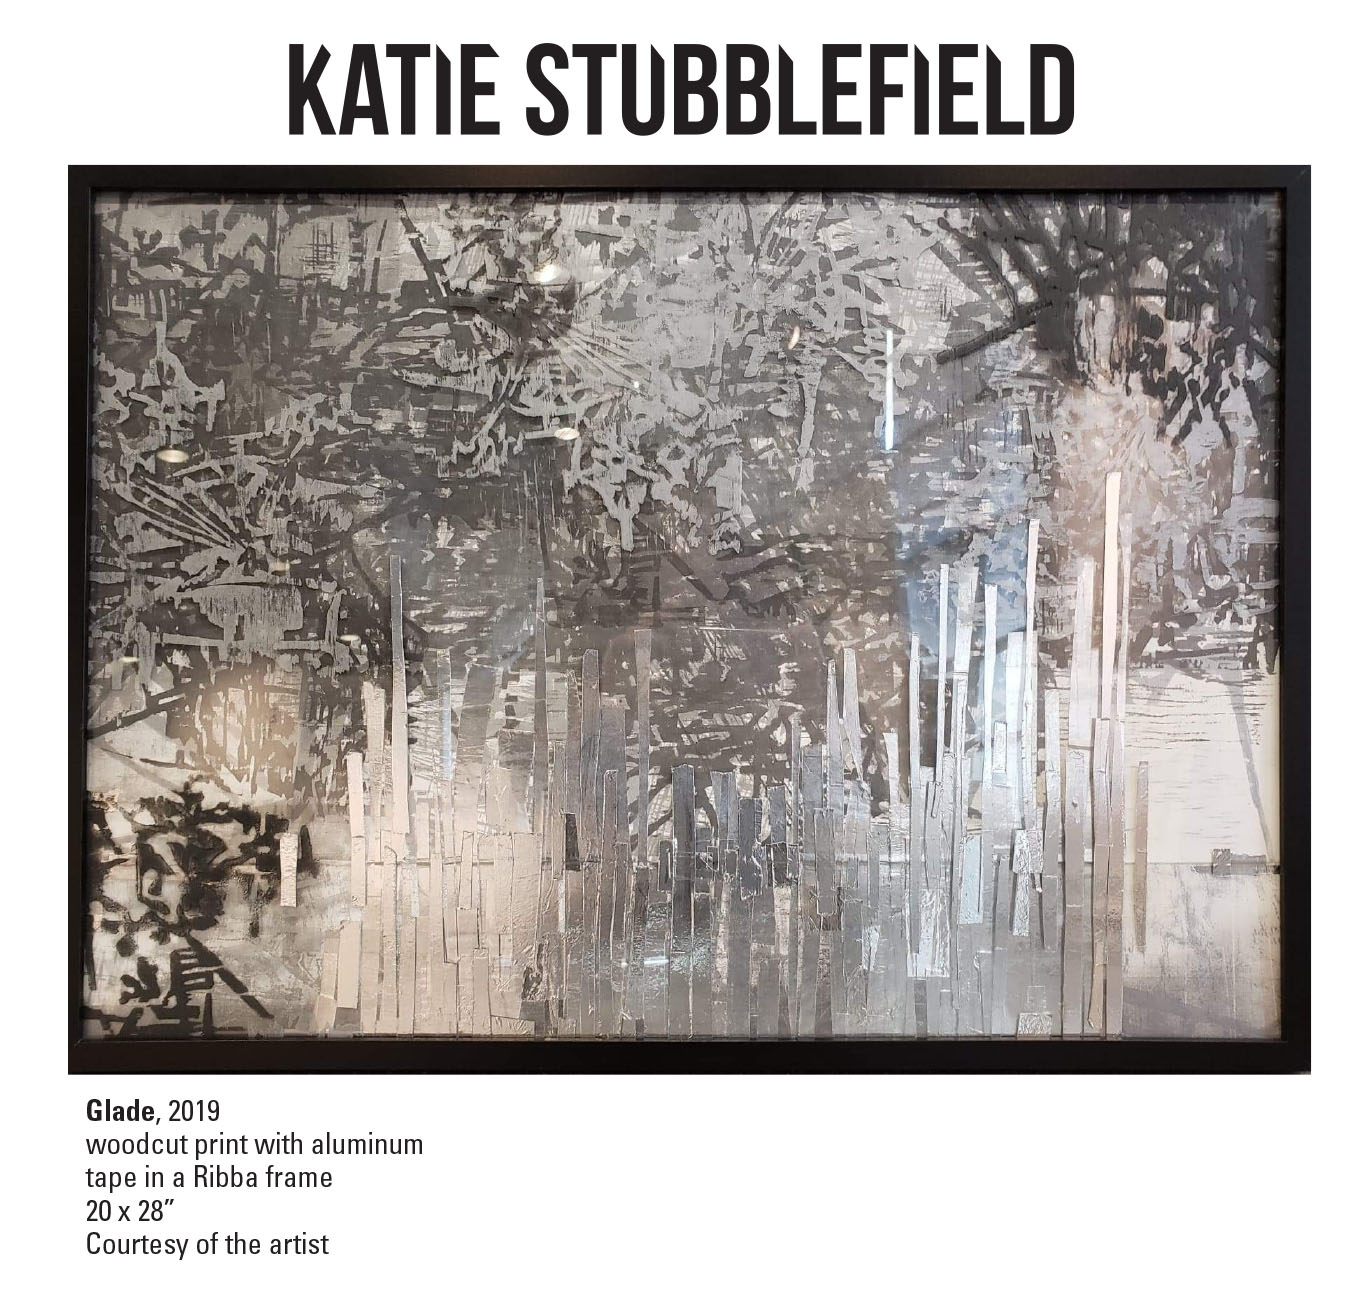 Katie Stubblefield, Glade, 2019. Woodcut print with aluminum tape in a Ribba frame. 20 x 28” Courtesy of the artist. A woodcut print of various lines creating a chaotic texture.